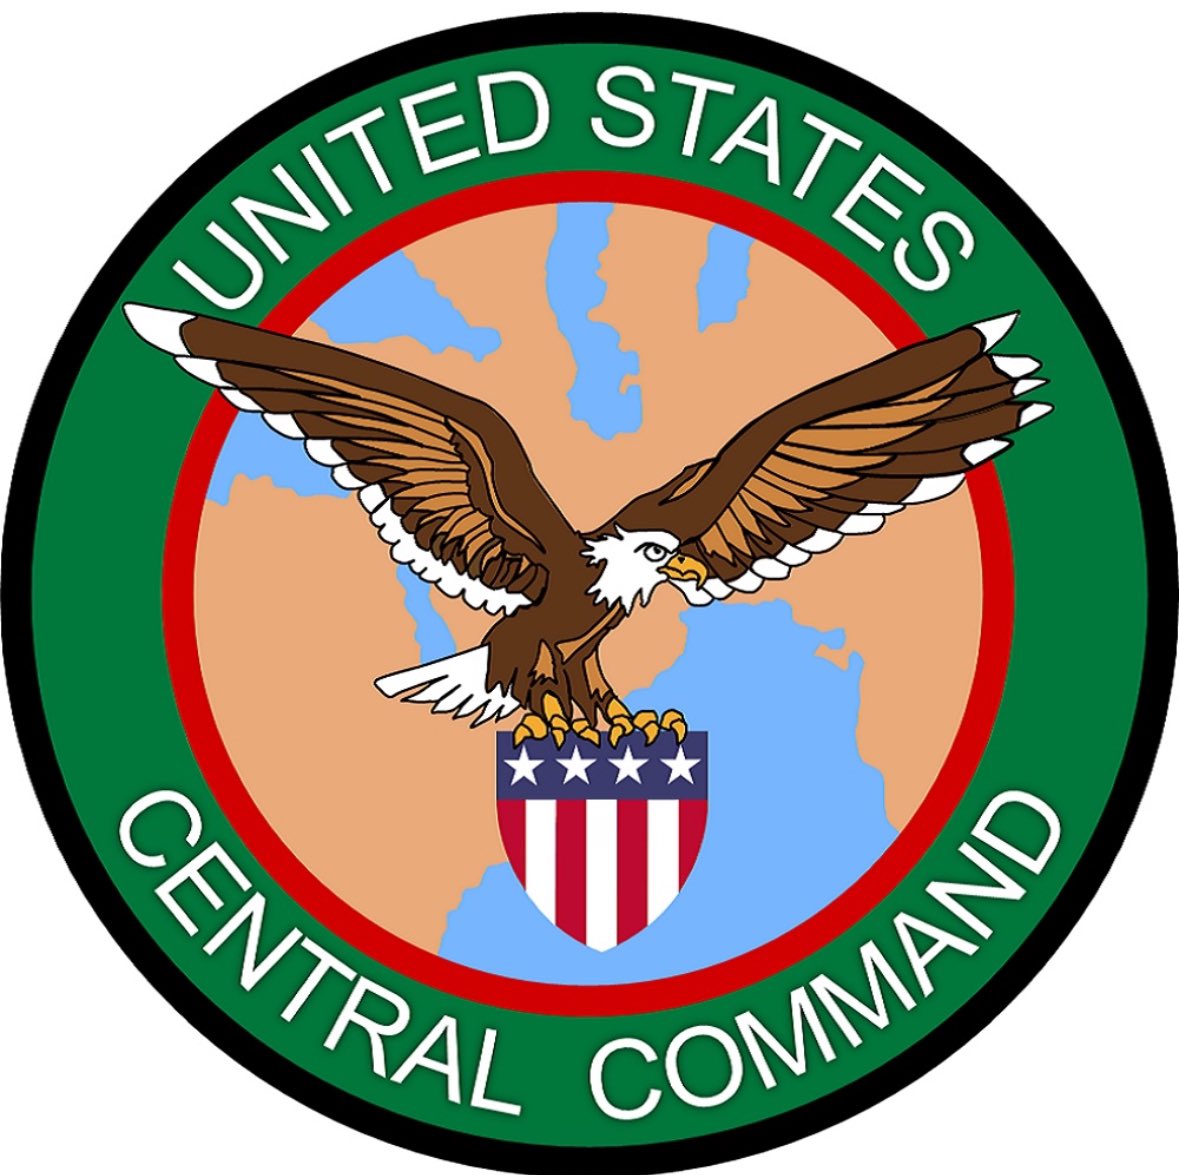 May 22 U.S. Central Command Update At approximately 3:16 p.m. (Sanaa time) on May 22, U.S. Central Command (USCENTCOM) forces successfully engaged four uncrewed aerial systems (UAS) in an Iranian-backed Houthi controlled area of Yemen.   It was determined these systems